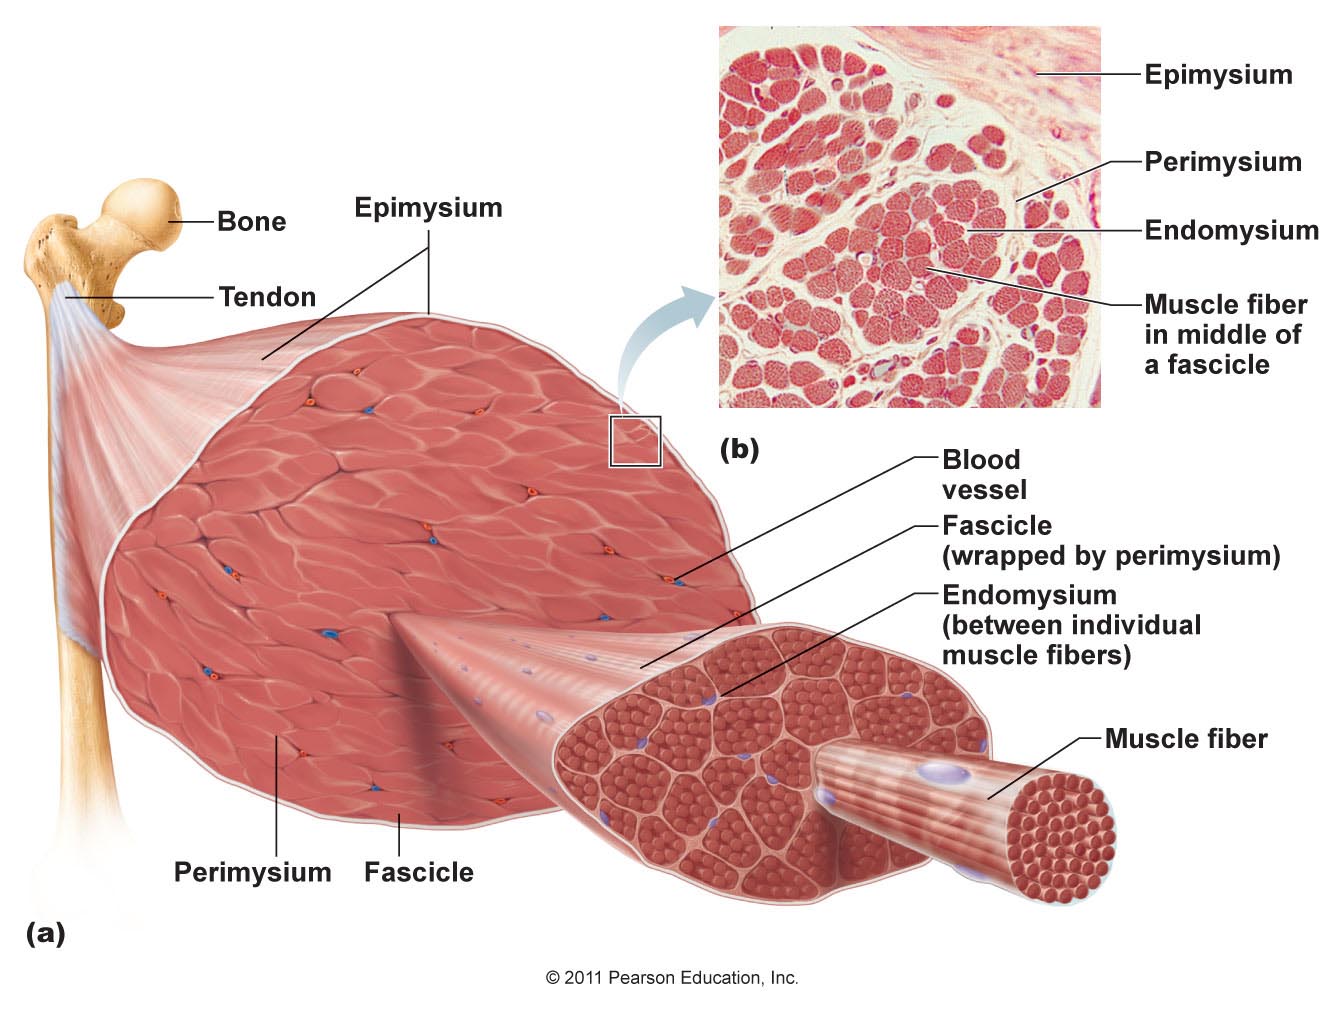 Diagram of the connective tissue structures surrounding muscles, fascicles, and individual muscle fibers.